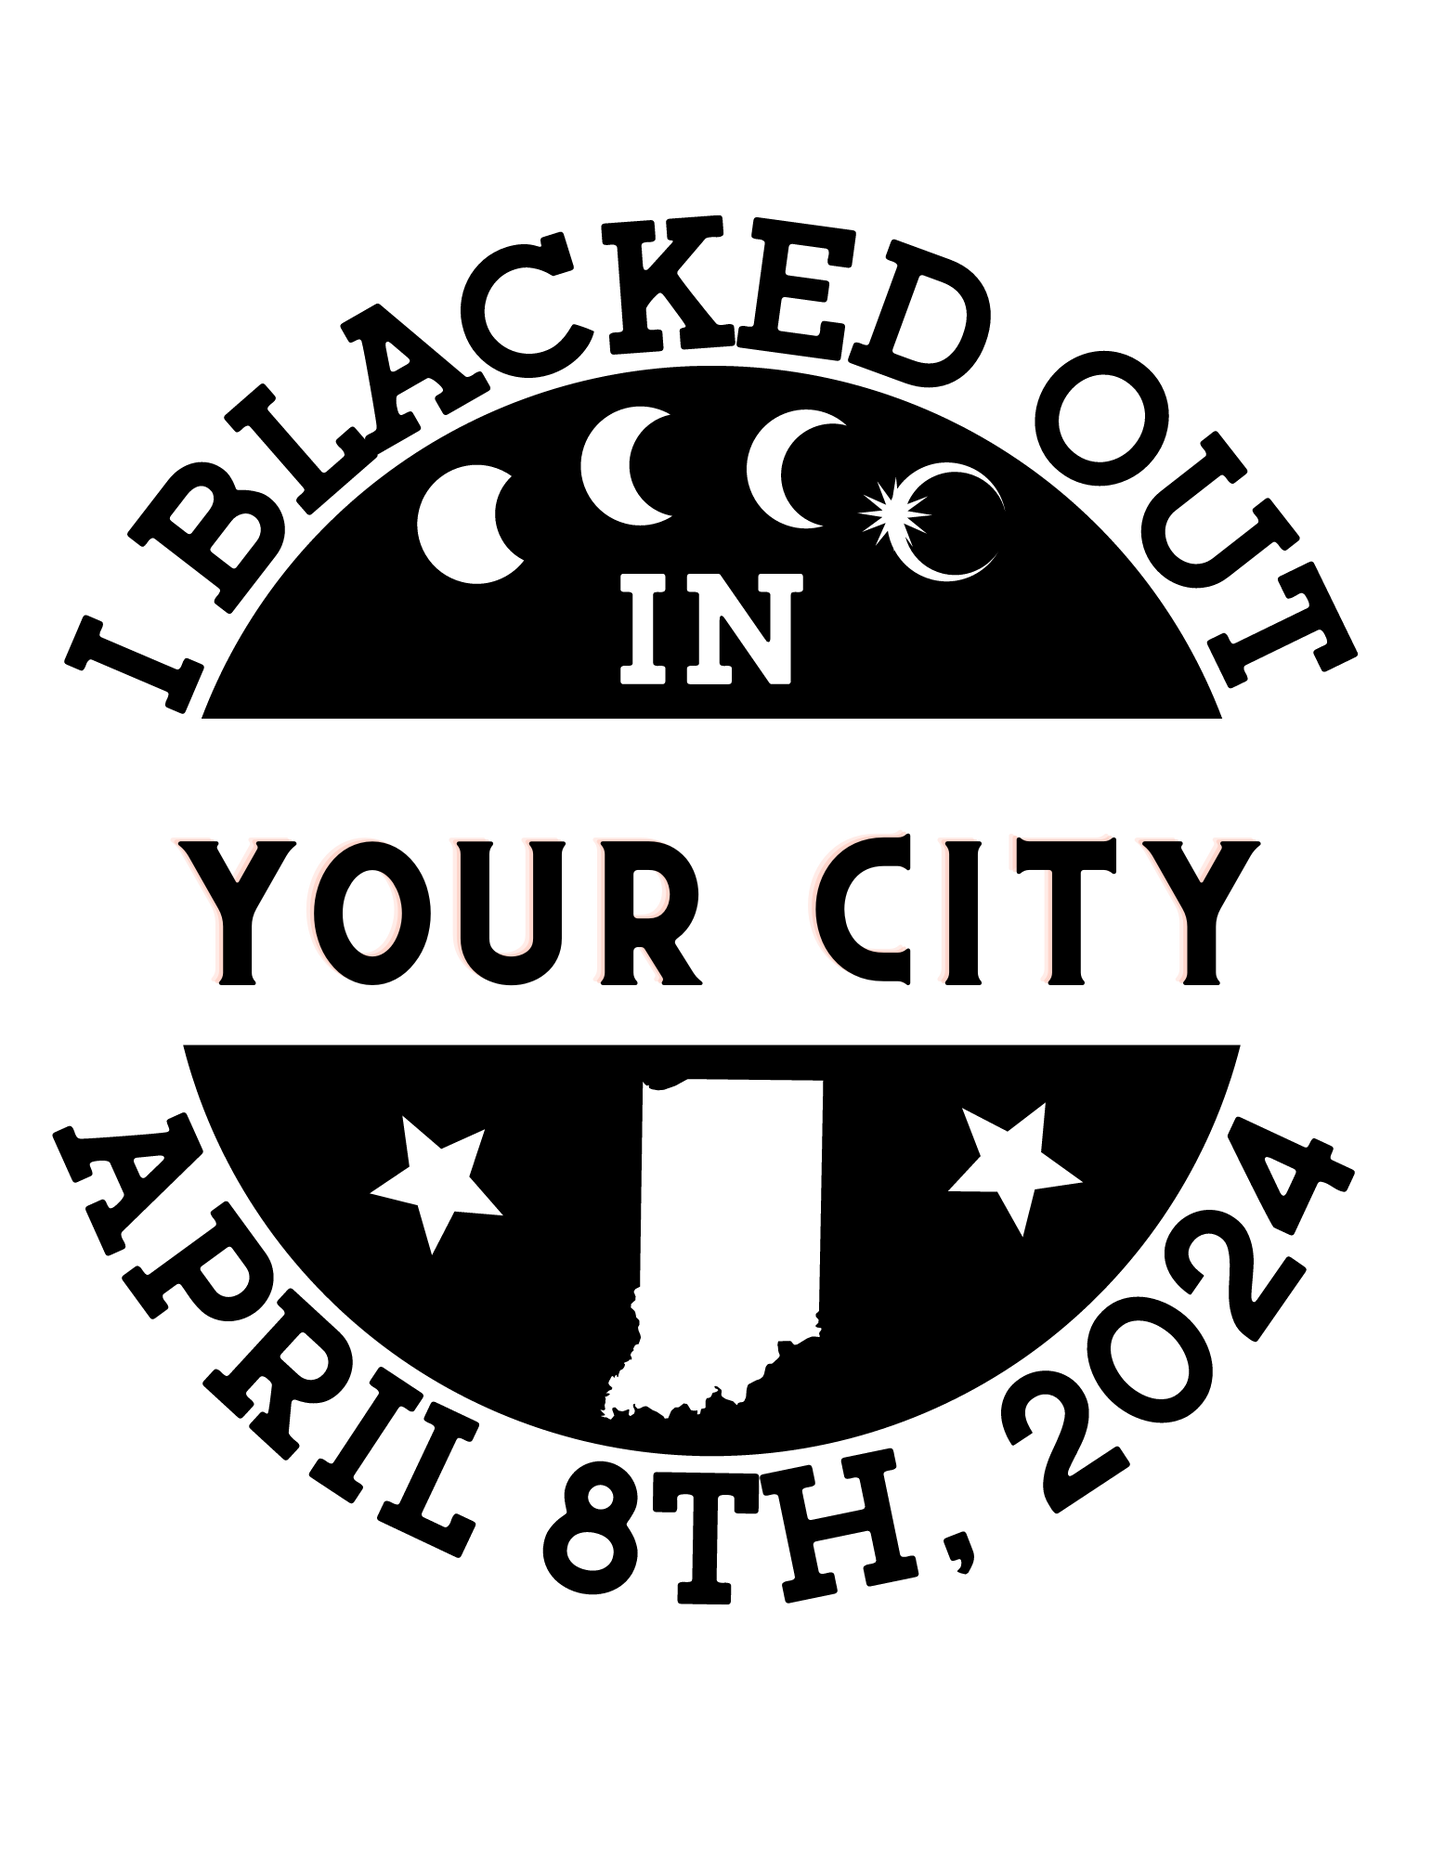 I blacked out in State/YOUR CITY- T-shirt (BLACK FONT)